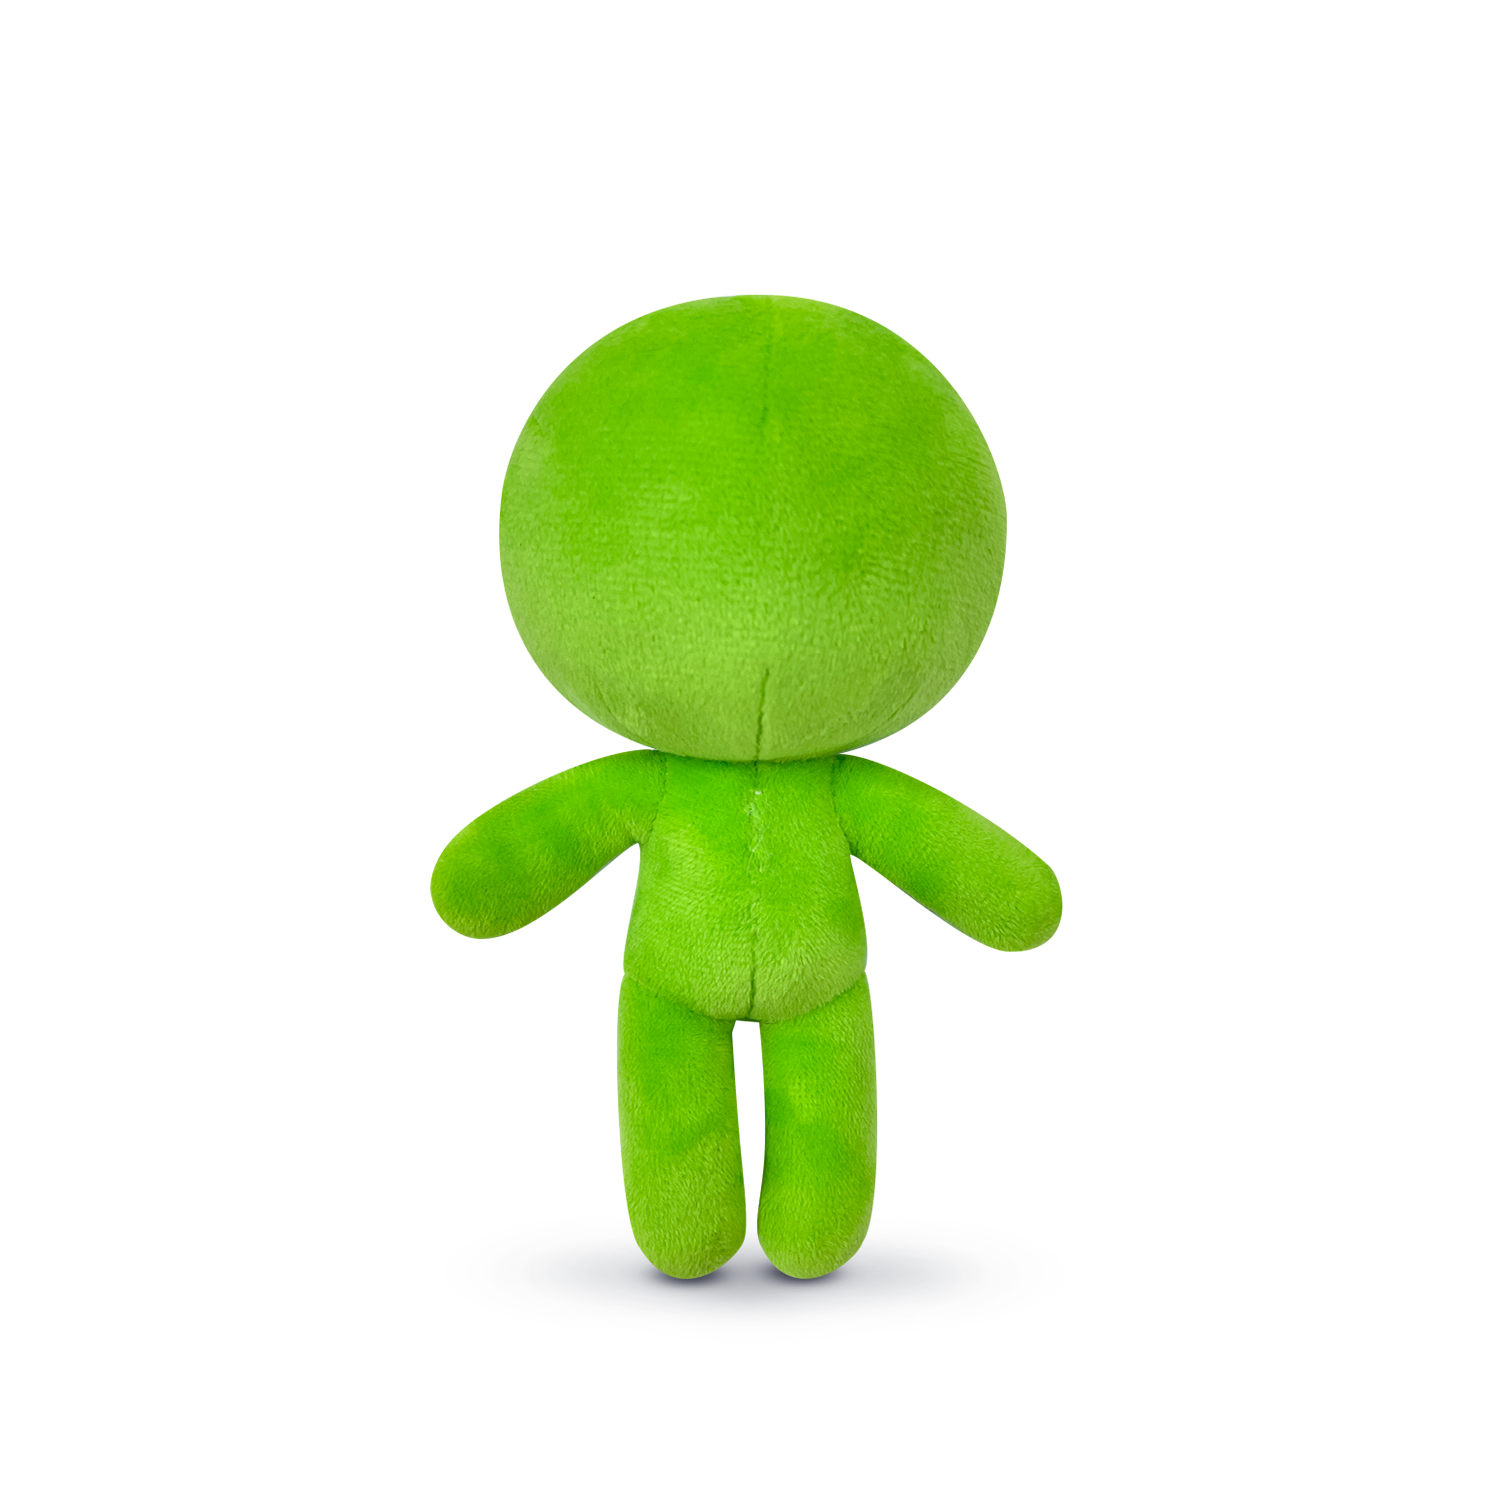 Alan Becker blind box plushies are available at @youtooz.com! But